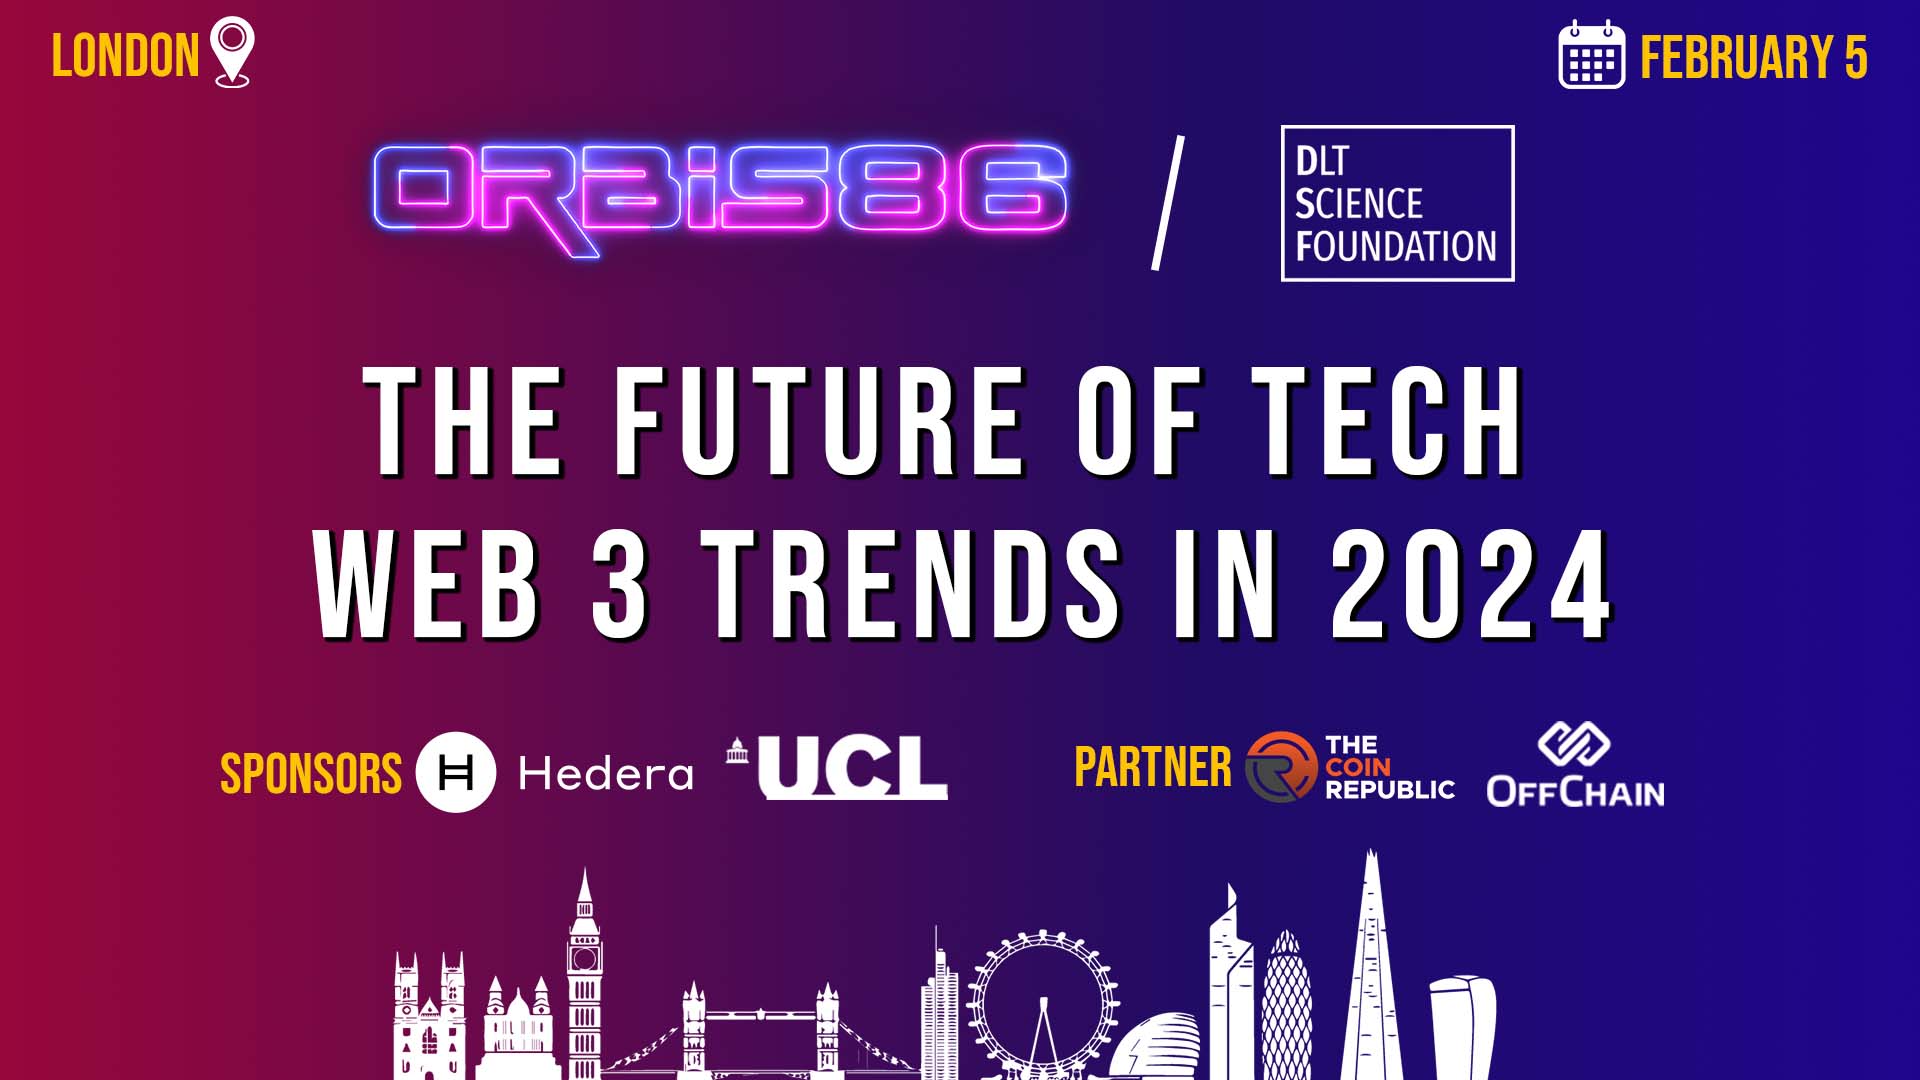 Dynamic Web3 Event is Returning: Orbis86: The Future of Tech - Web3 Trends in 2024